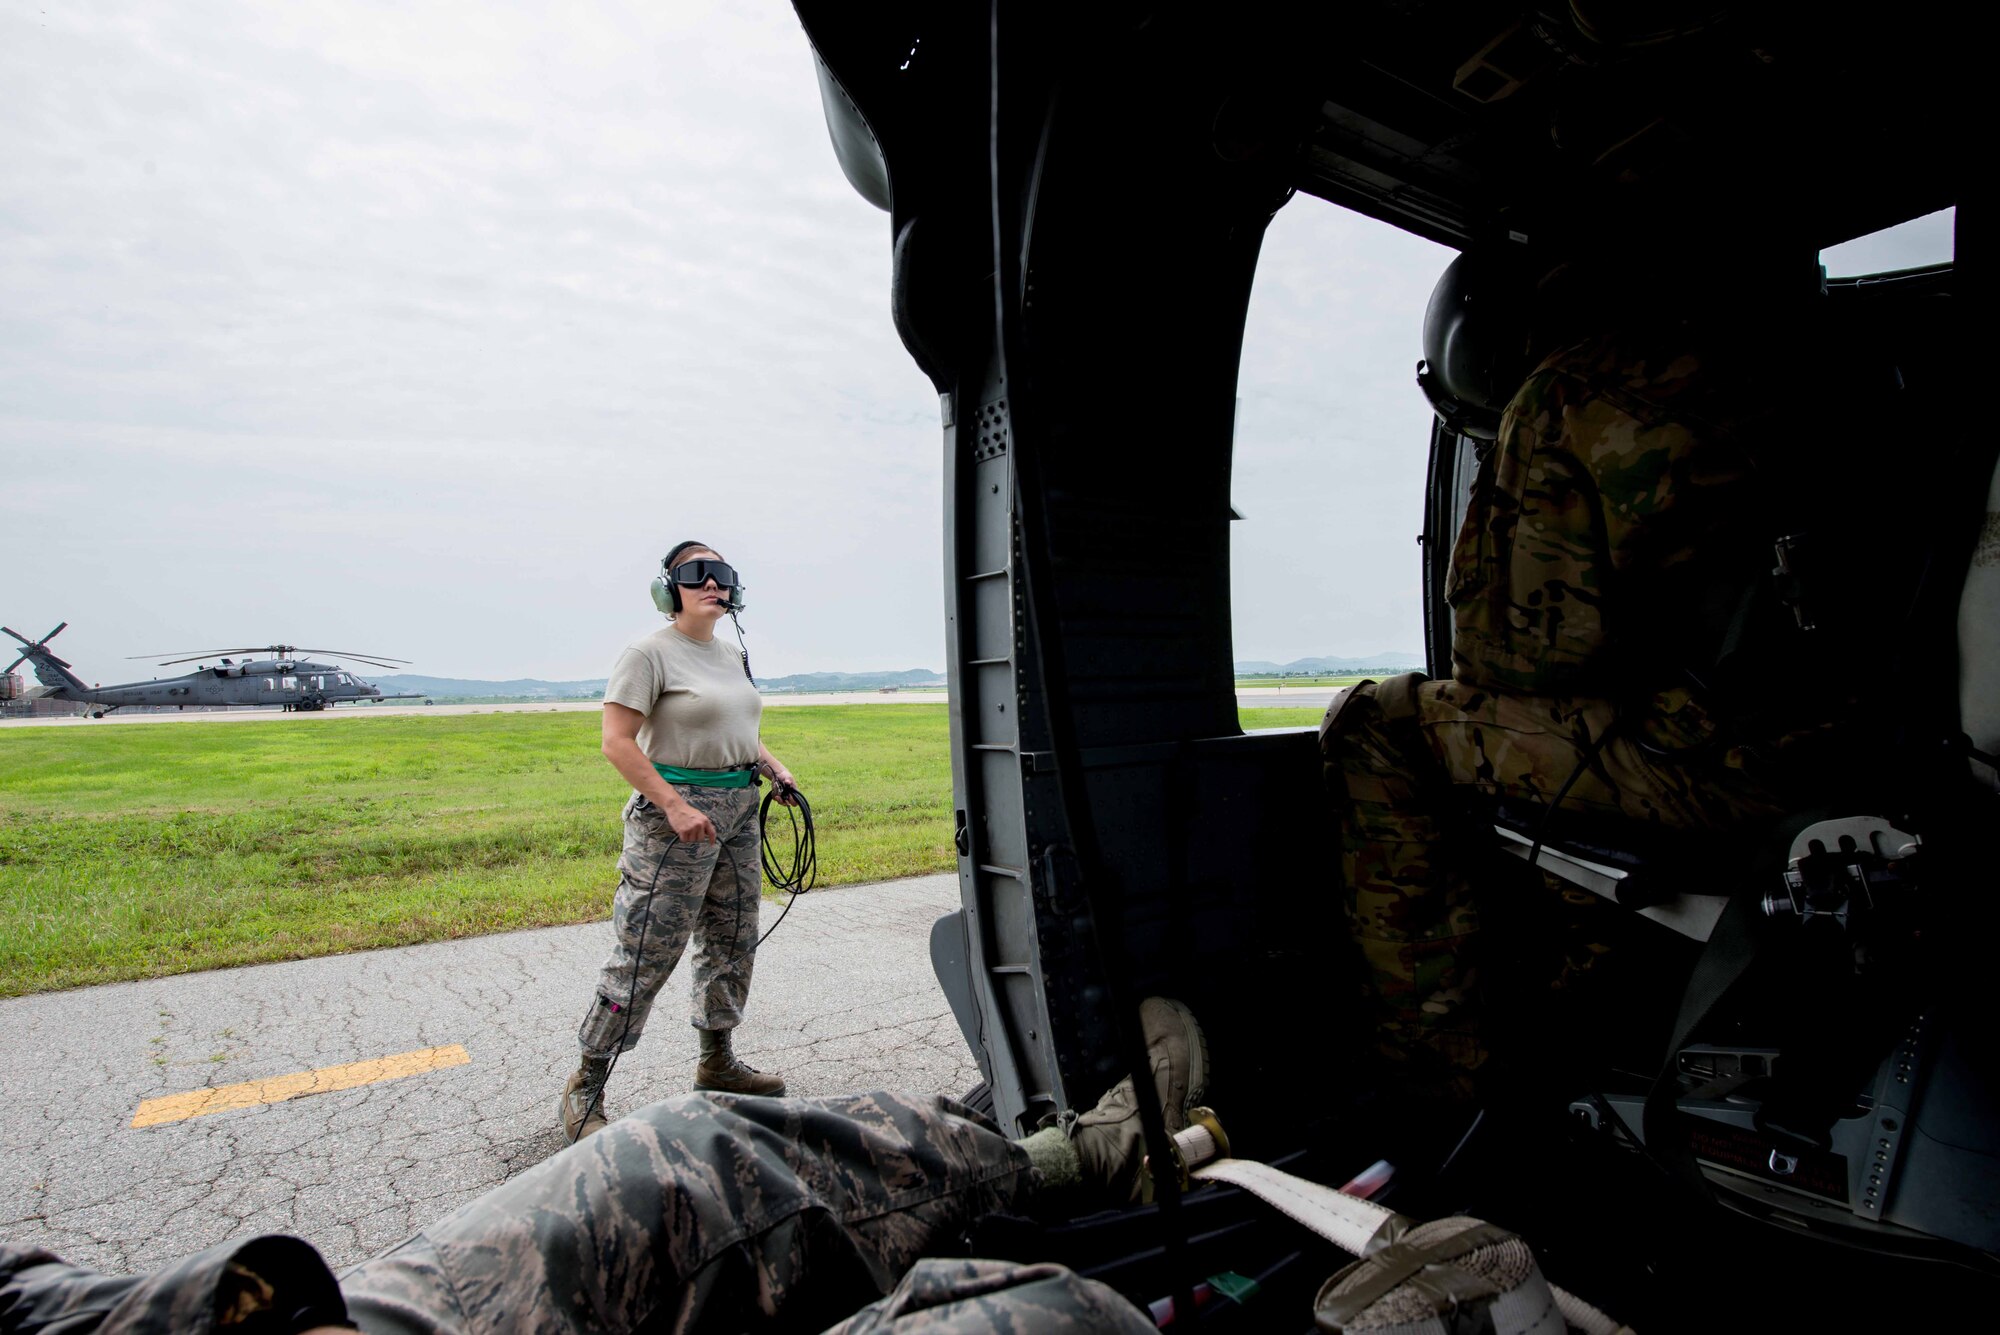 Senior Airman Gricelda Tomson, 33rd Helicopter Maintenance Unit guidance flight control technician, watches as an HH-60G Pave Hawk assigned to the 33rd Rescue Squadron starts up during Exercise Pacific Thunder 16-2 at Osan Air Base, Republic of Korea, July 13, 2016. The 33rd RQS comes to Osan to participate in Pacific Thunder to train their combat search and rescue capabilities. (U.S. Air Force photo by Staff Sgt. Jonathan Steffen/Released) 